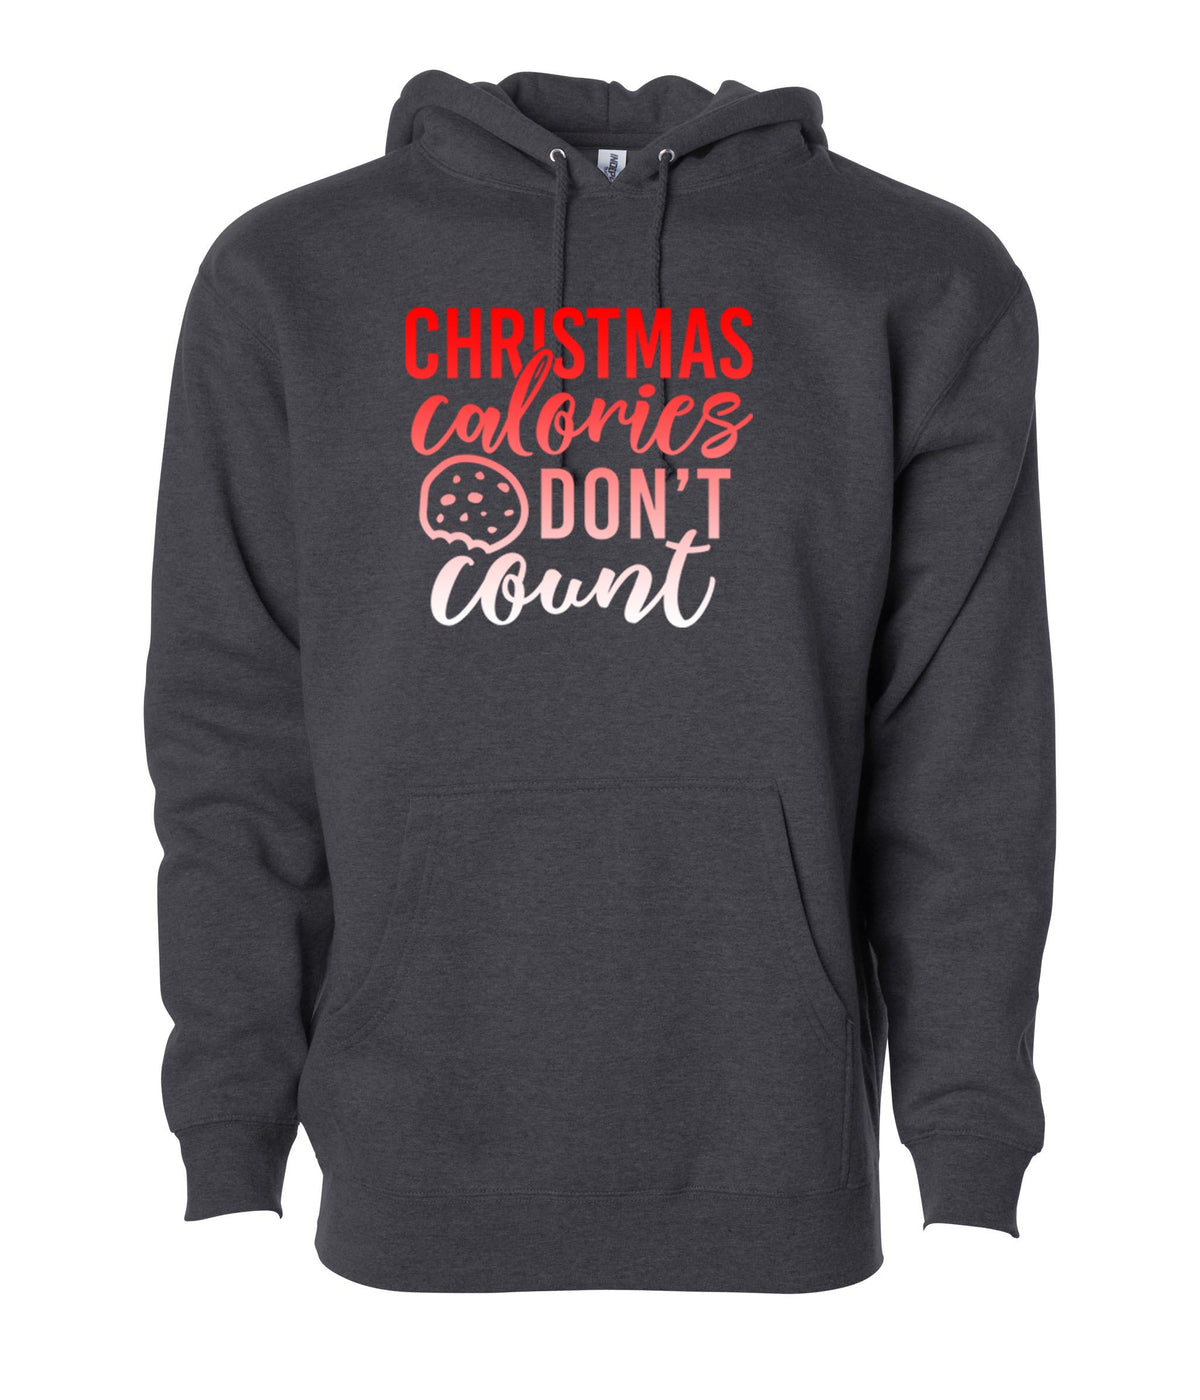 Christmas calories Don't Count Hooded Sweatshirt